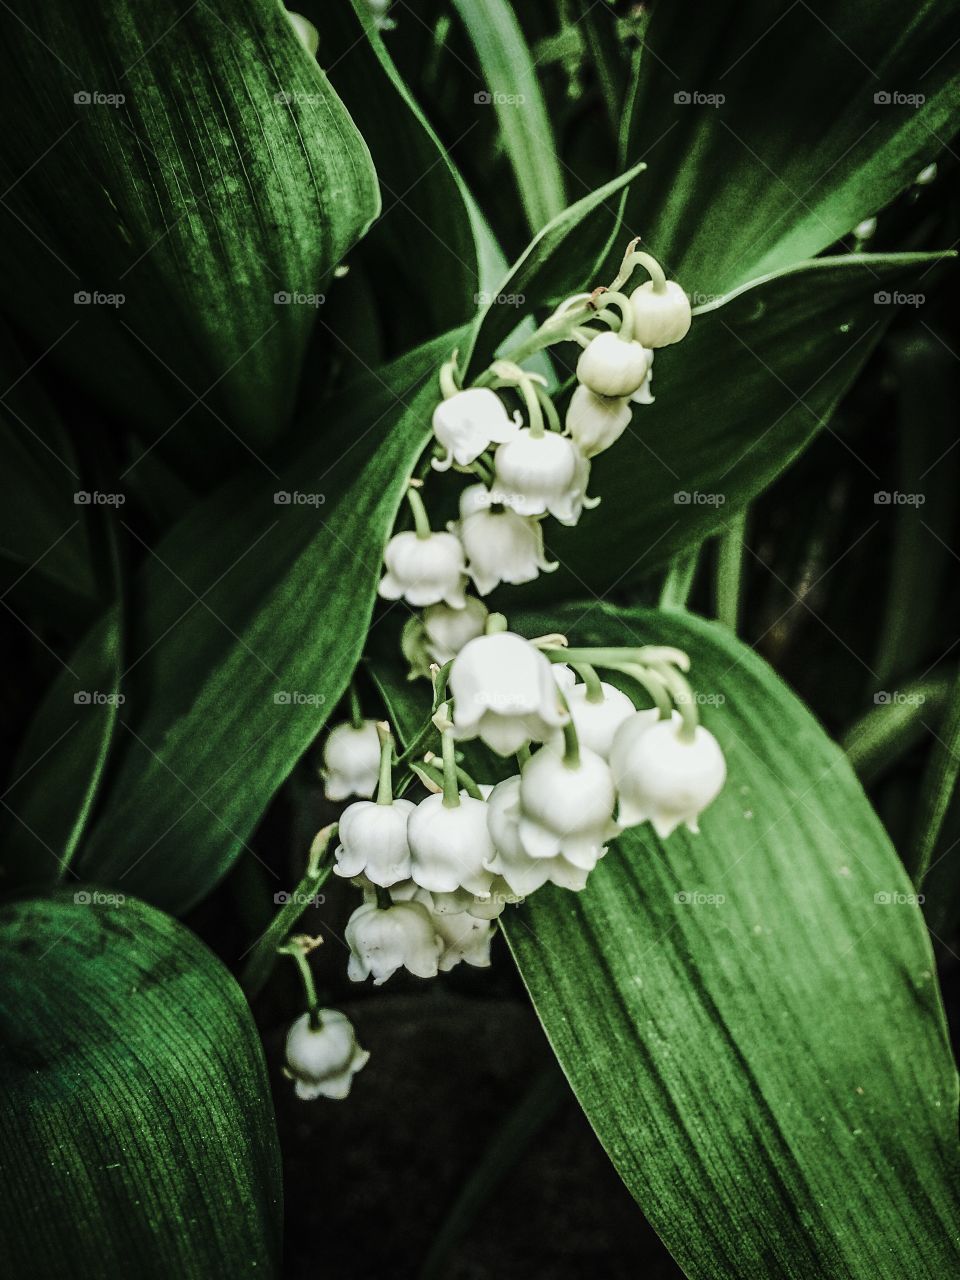 Lilies of the field. . Beauty hides within the thicket of greenery right under our feet. 